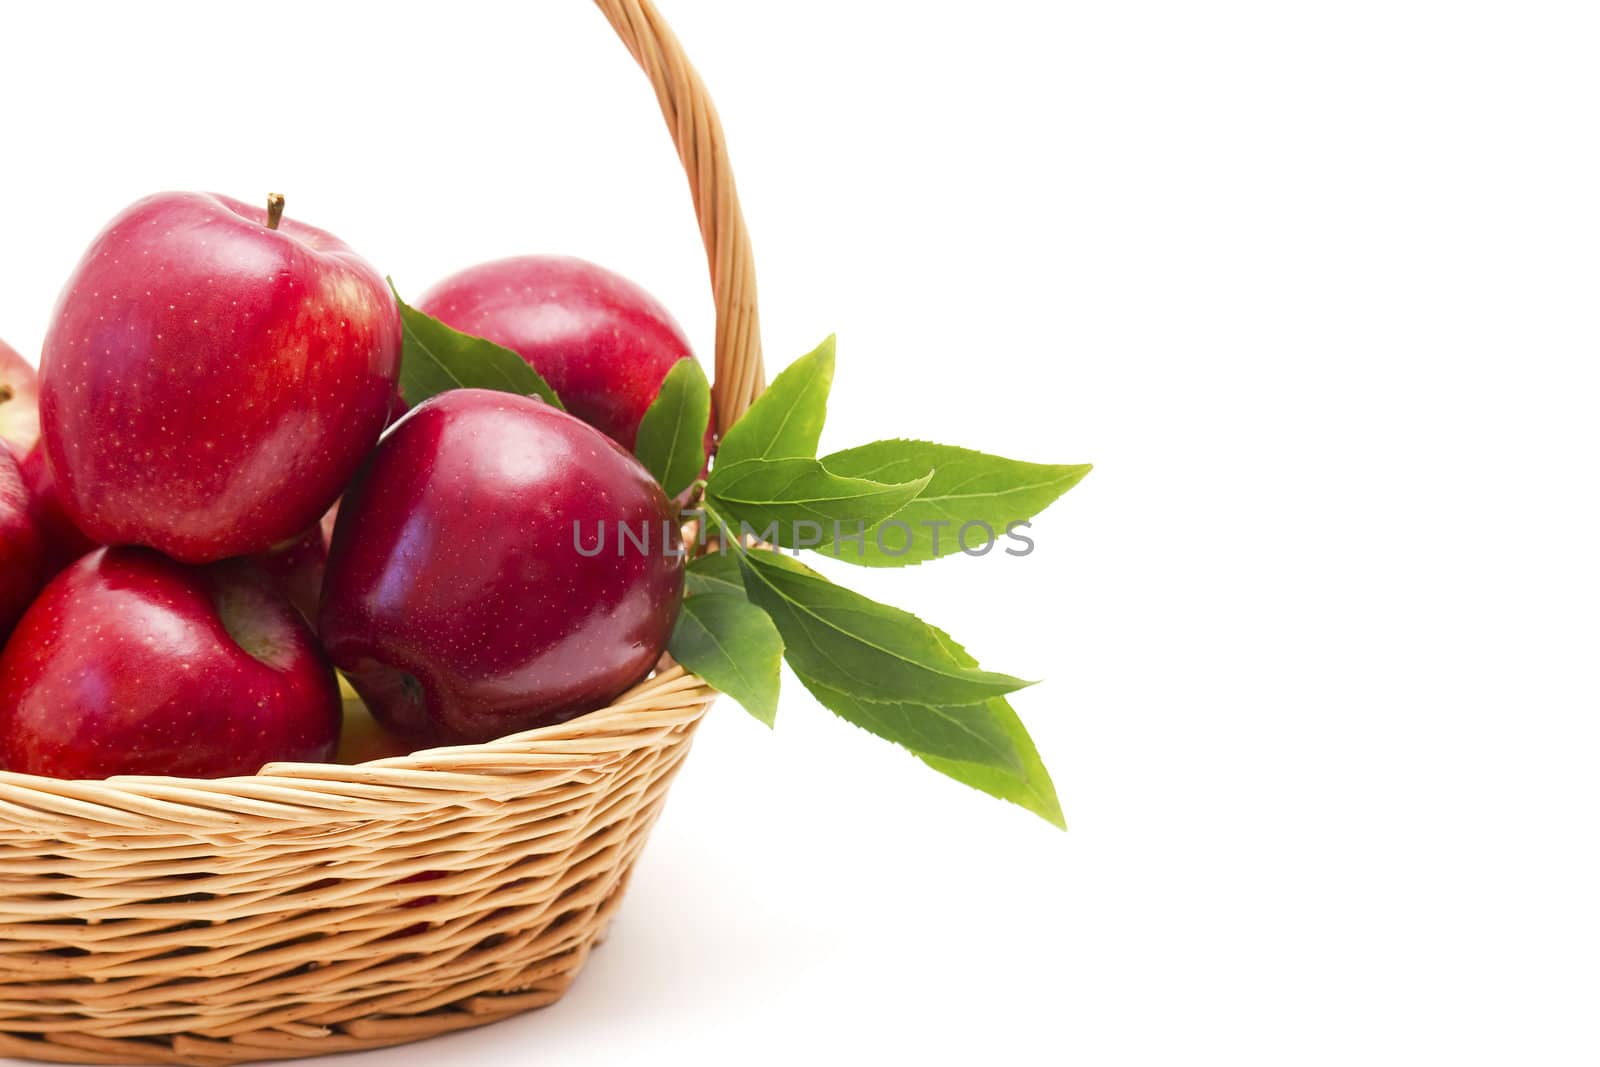 red apples in the basket